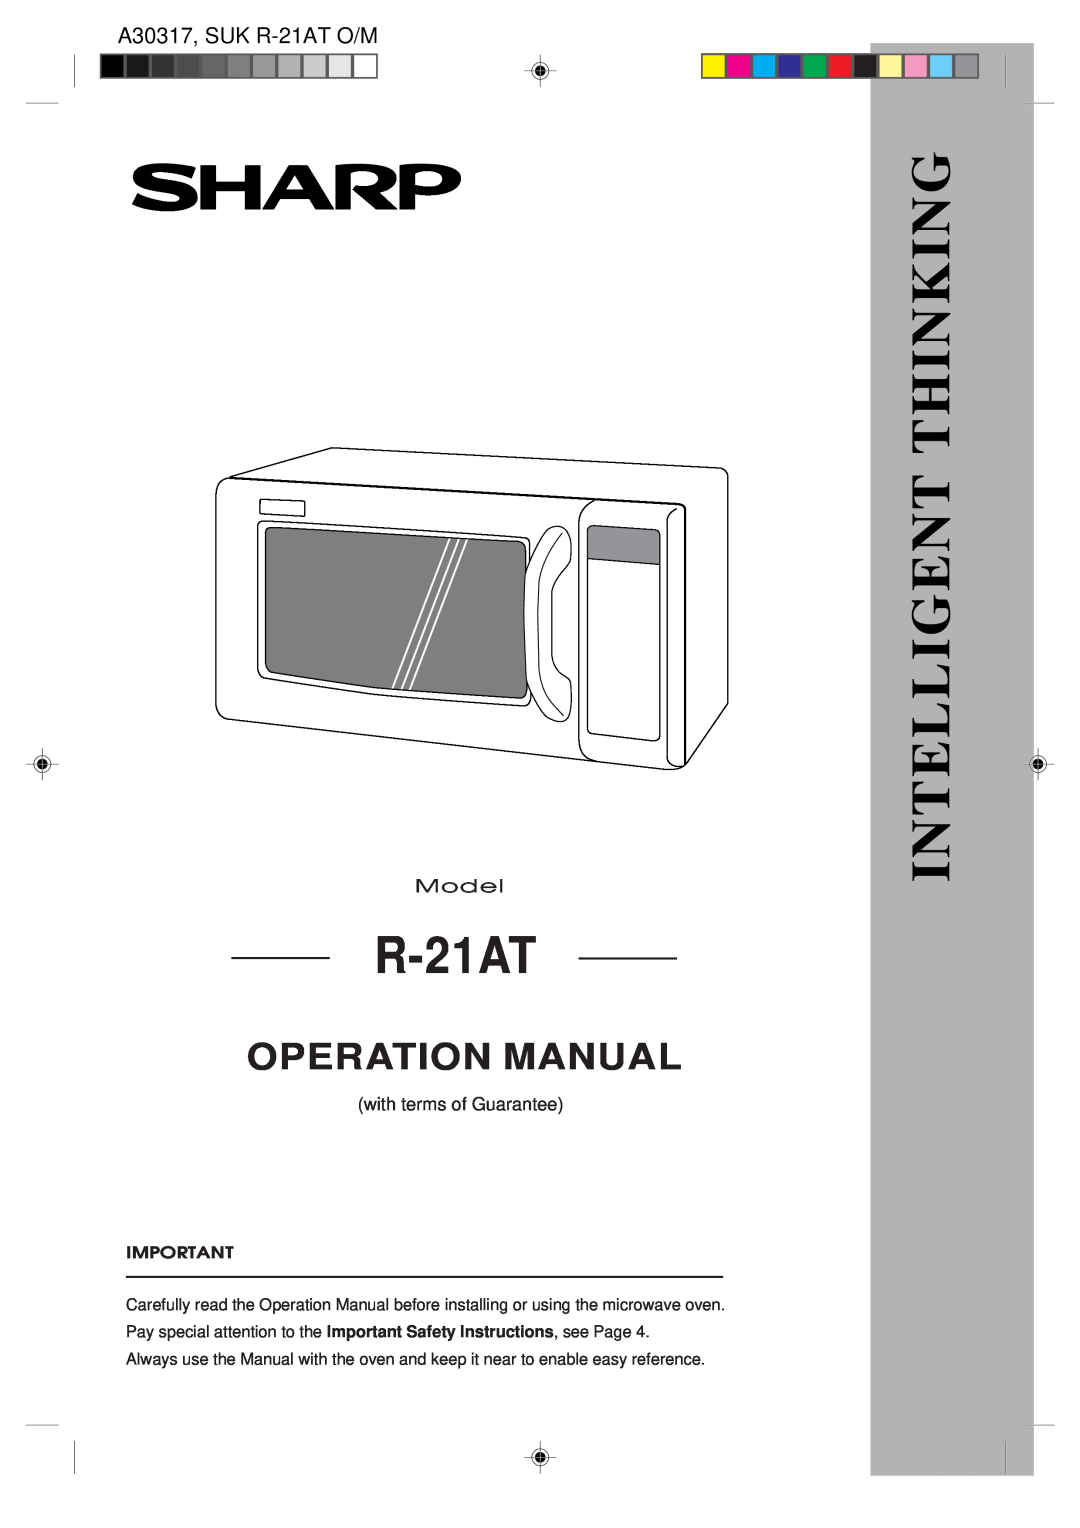 Sharp operation manual A30317, SUK R-21AT O/M, Model, with terms of Guarantee, Intelligent Thinking, Operation Manual 